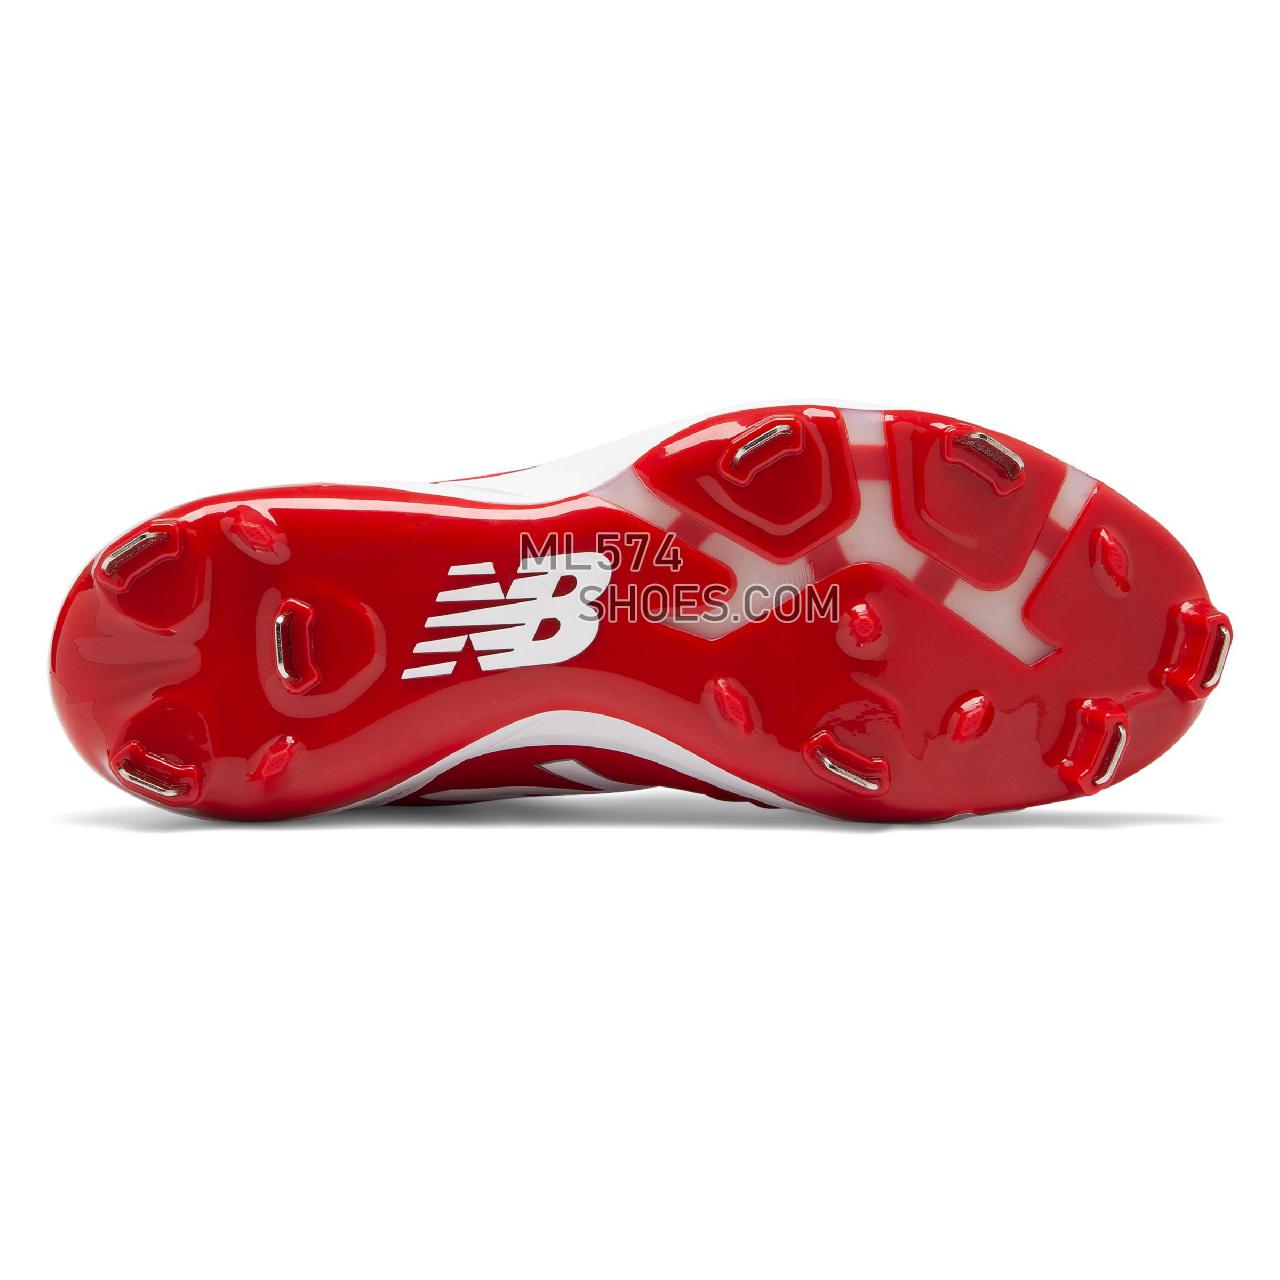 New Balance Fuse v2 Low Cut Metal - Women's Softball - Red with White - SMFUSER2